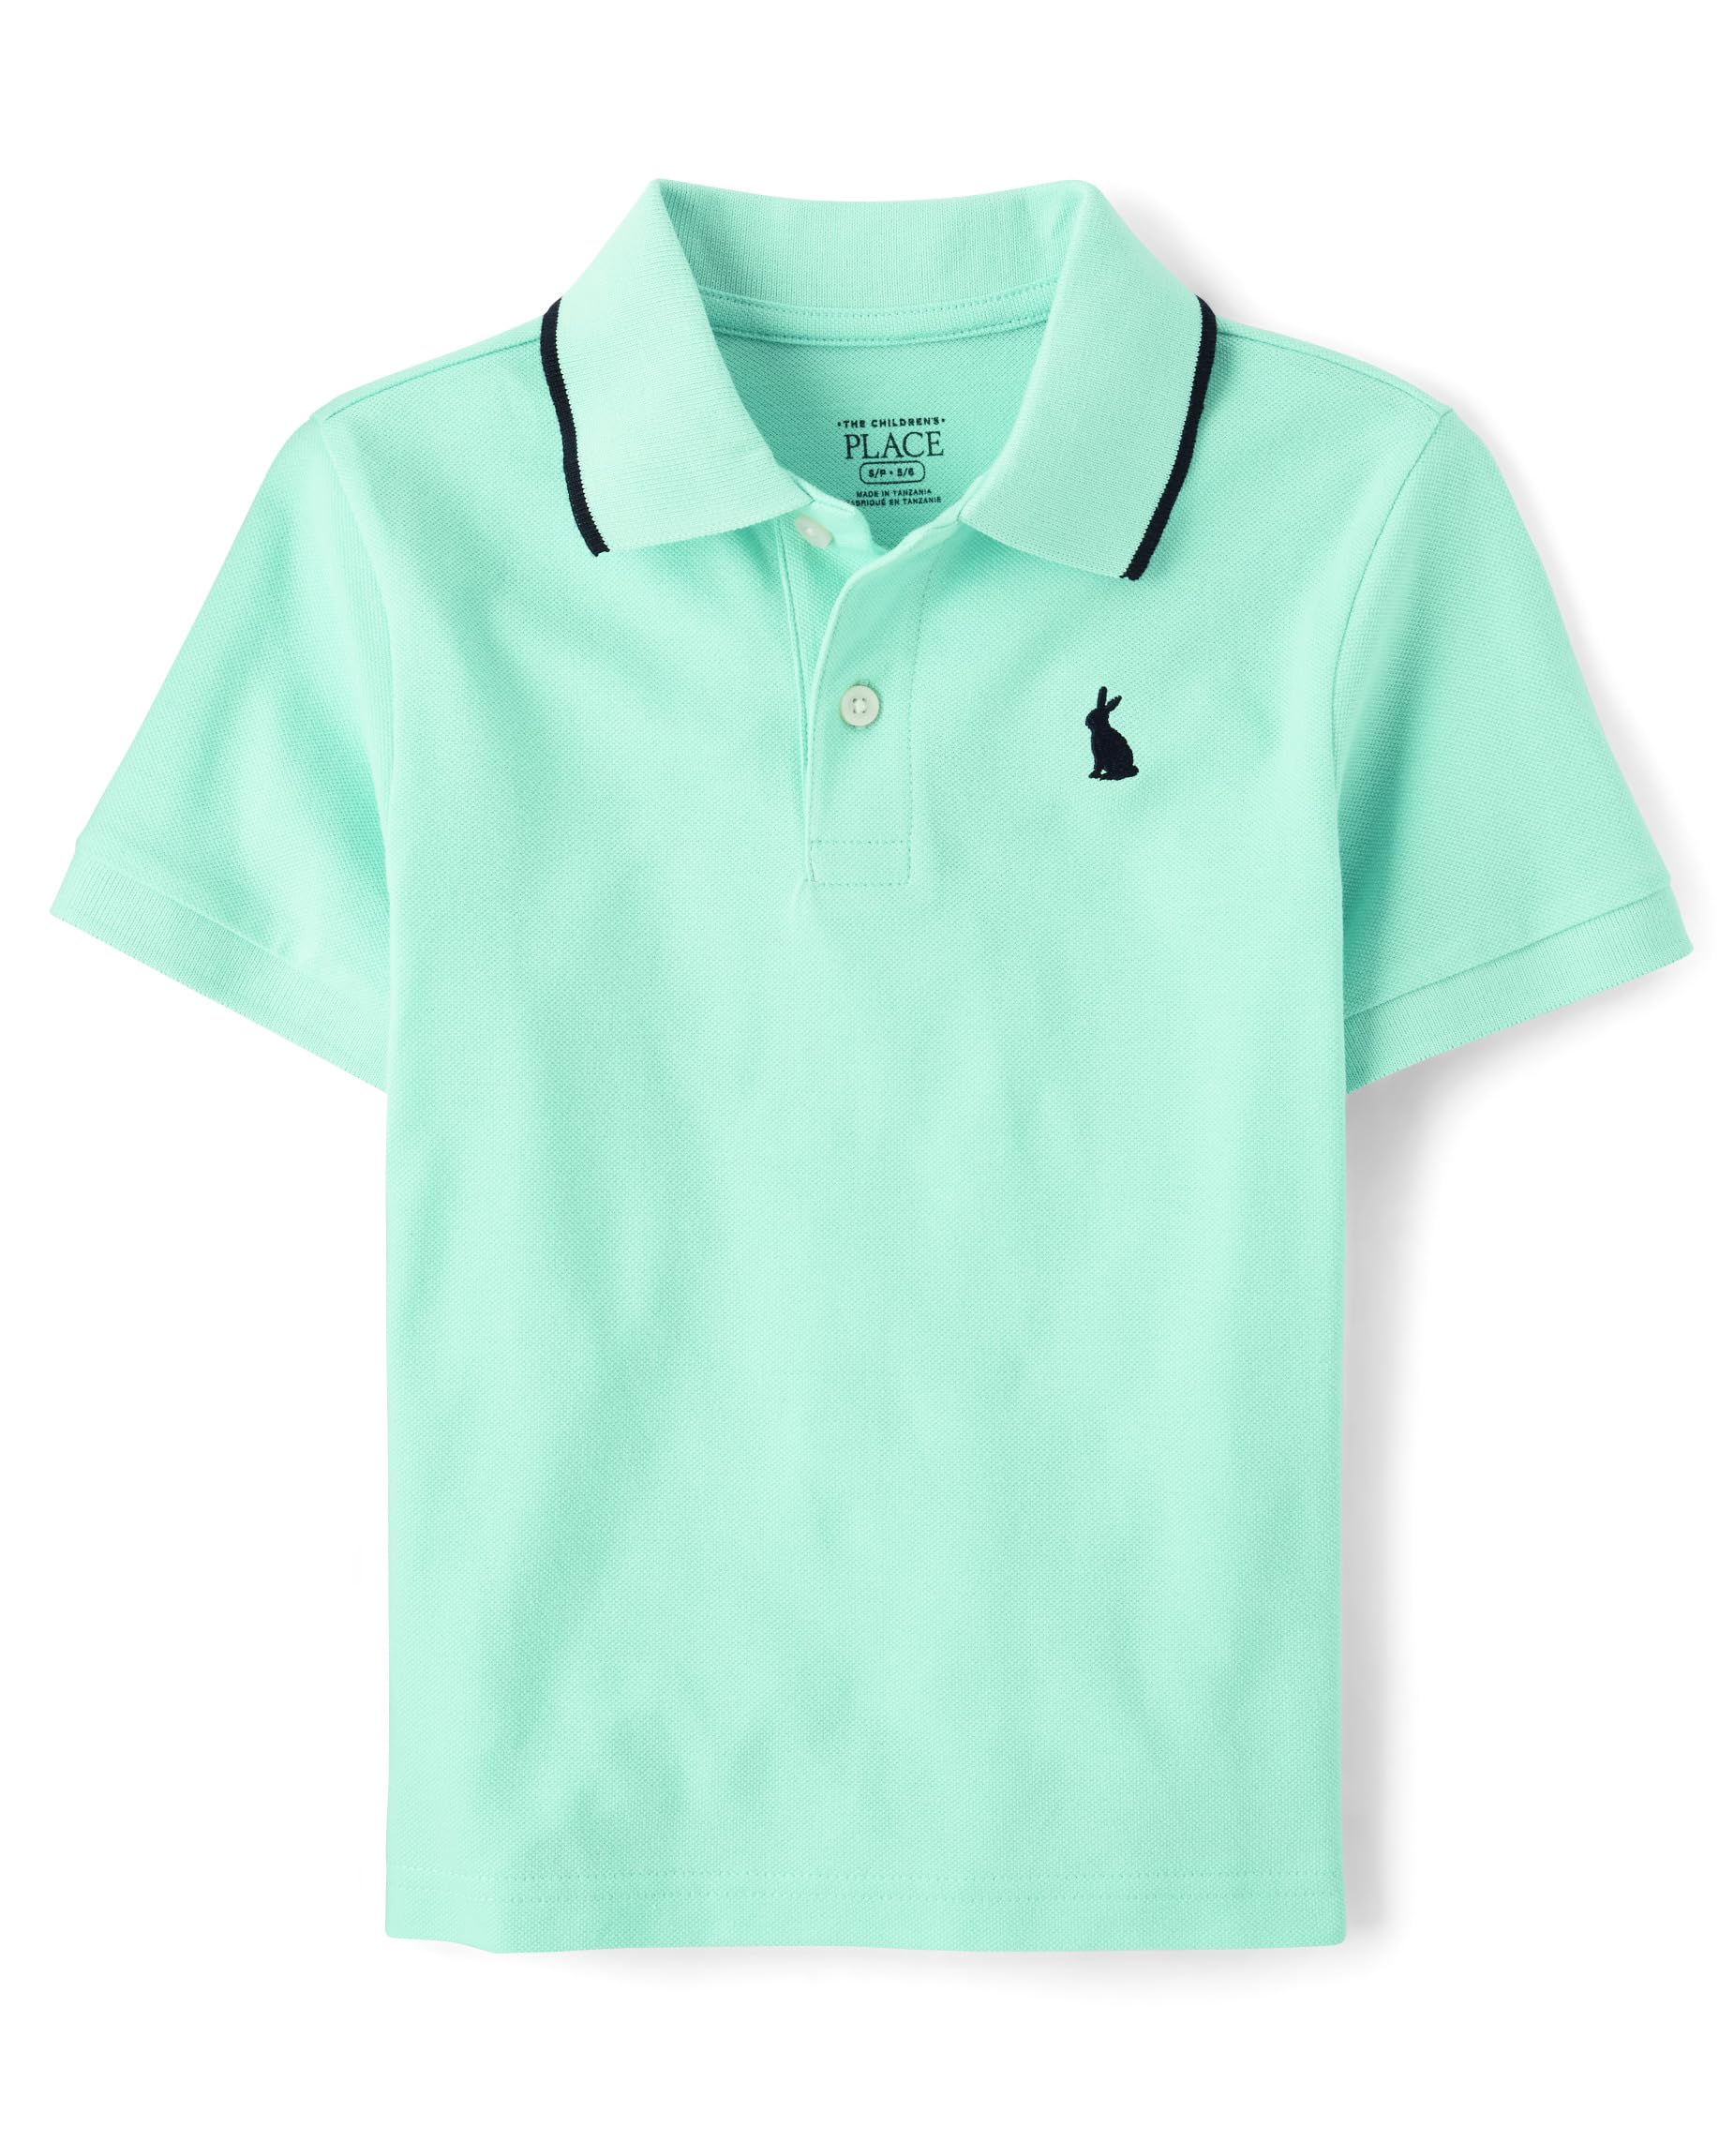 The Children's Place Boys' Short Sleeve Knit Polo